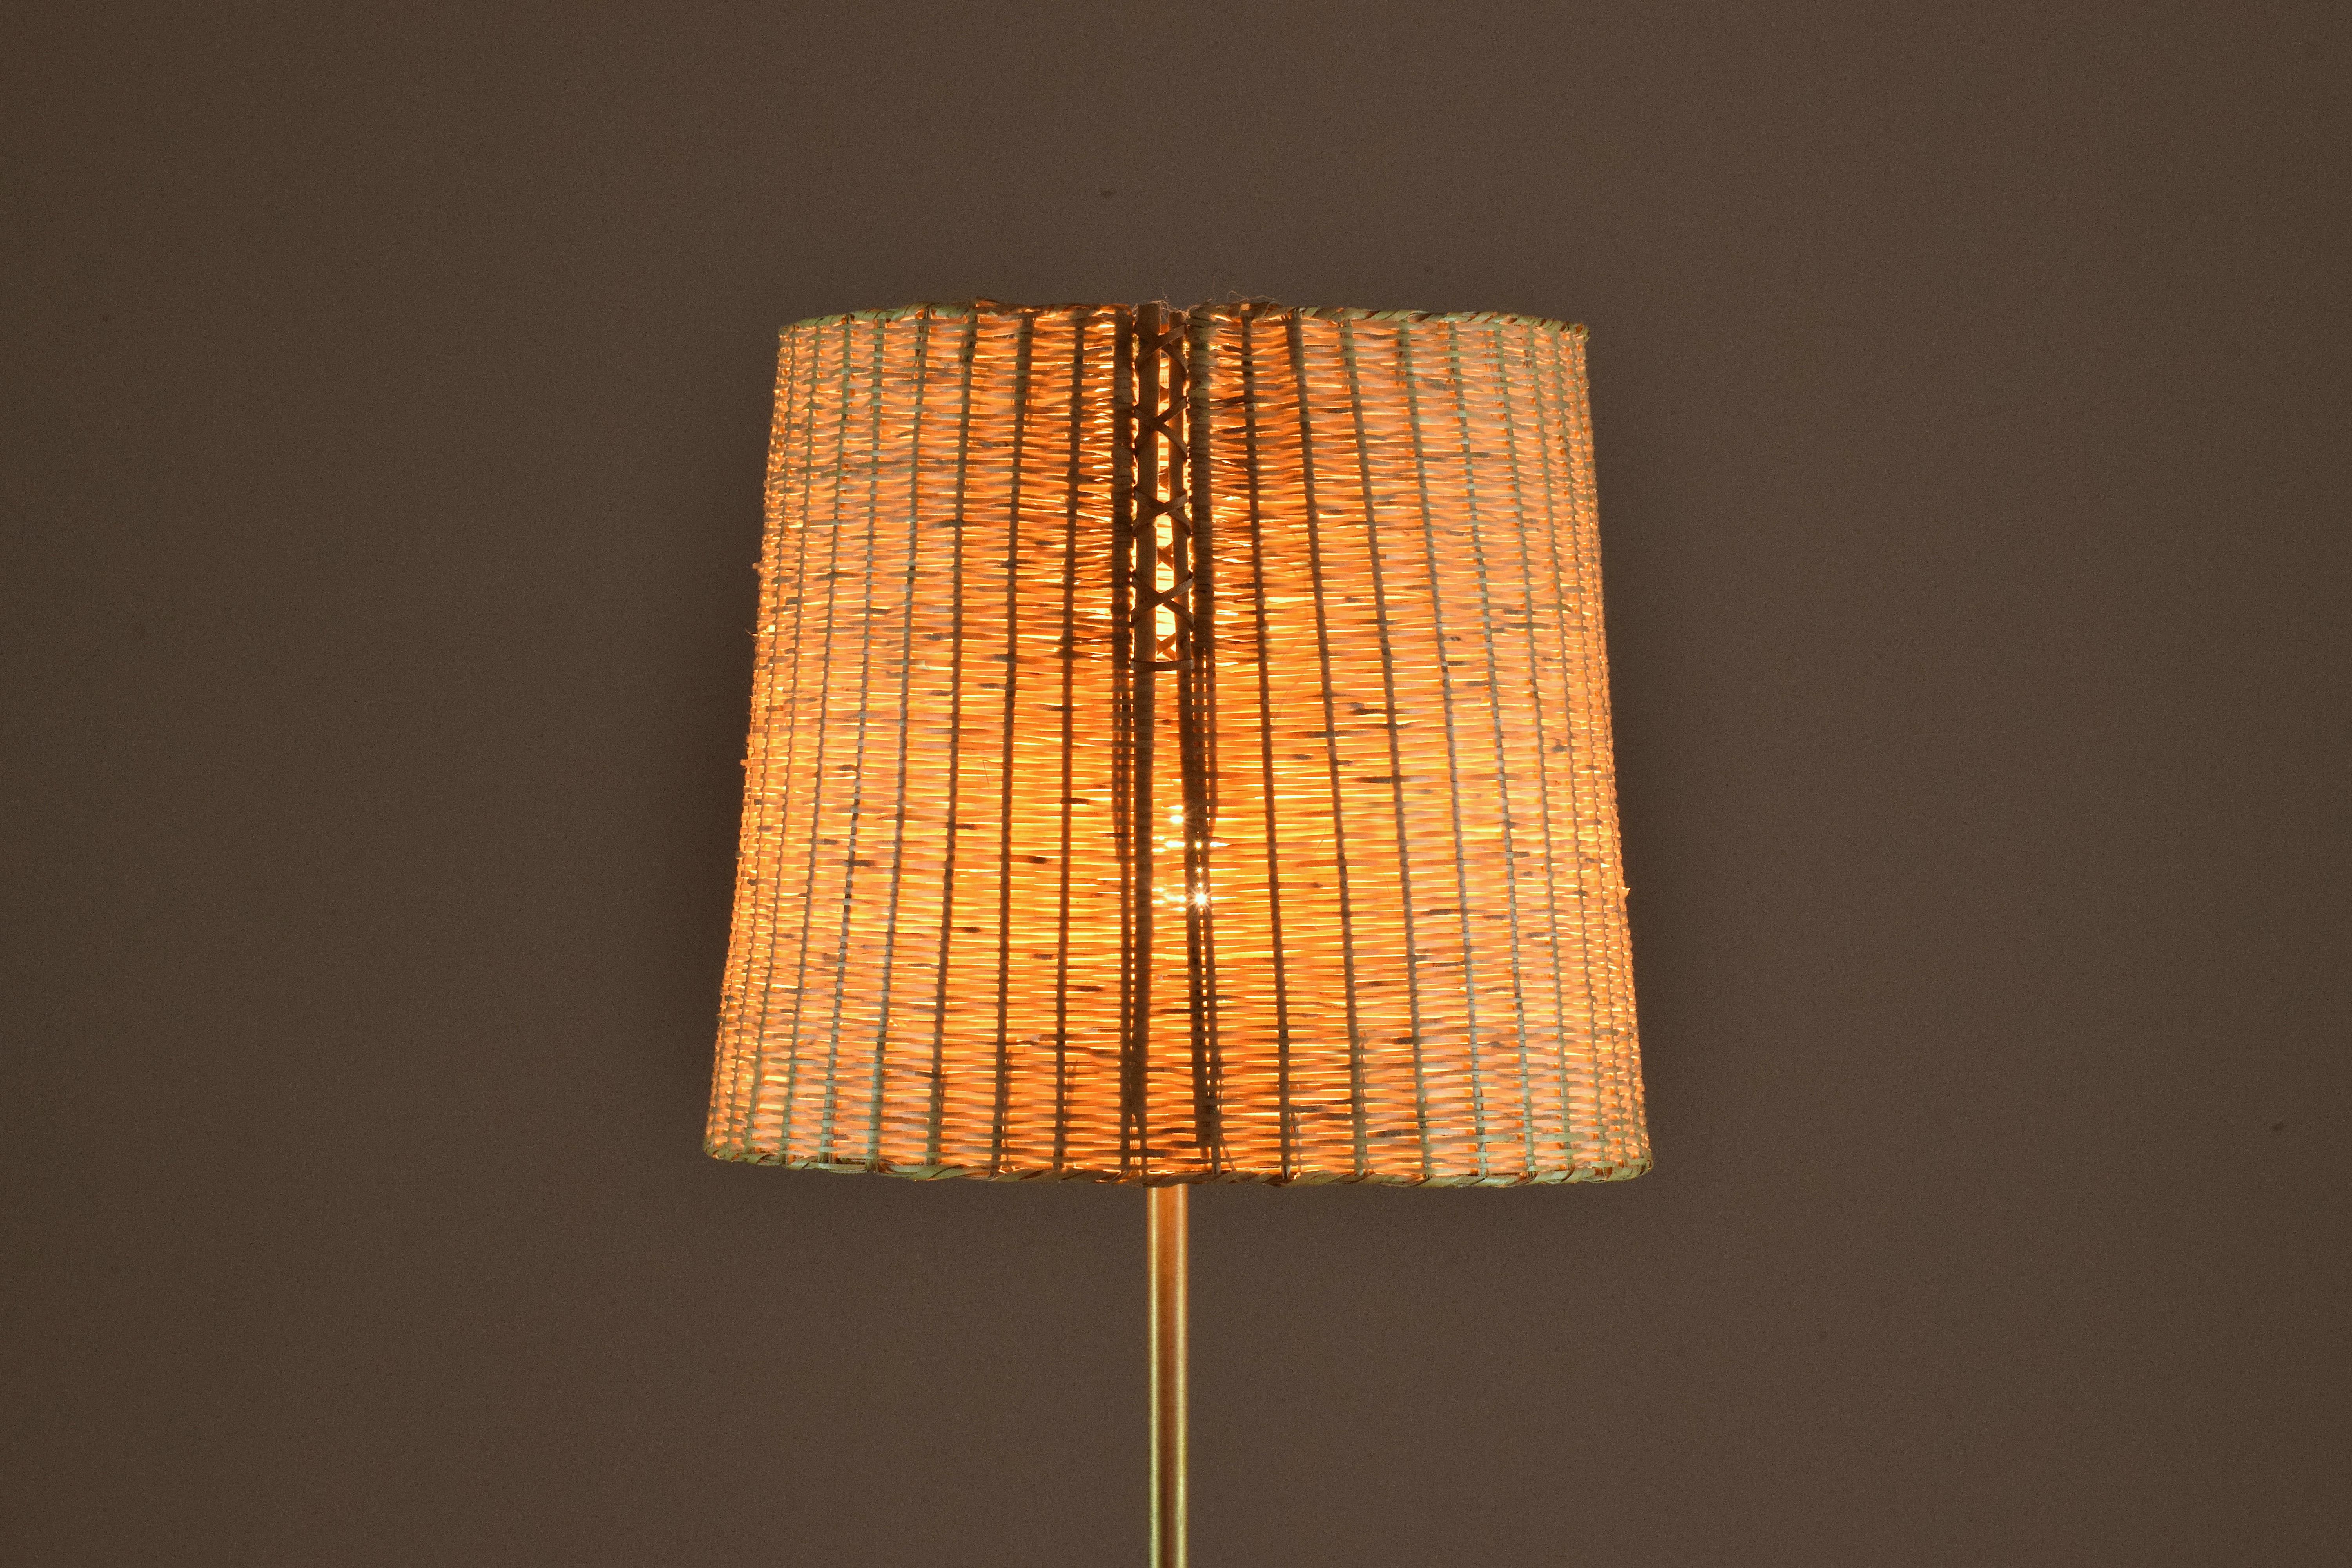 The Ancora floor light stands on an entirely leather sheathed slender brass structure and sits on a tripod solid brass with walnut endings. The shade is delicately handcrafted by expert Moroccan artisans in wicker (or rattan) and features a braided